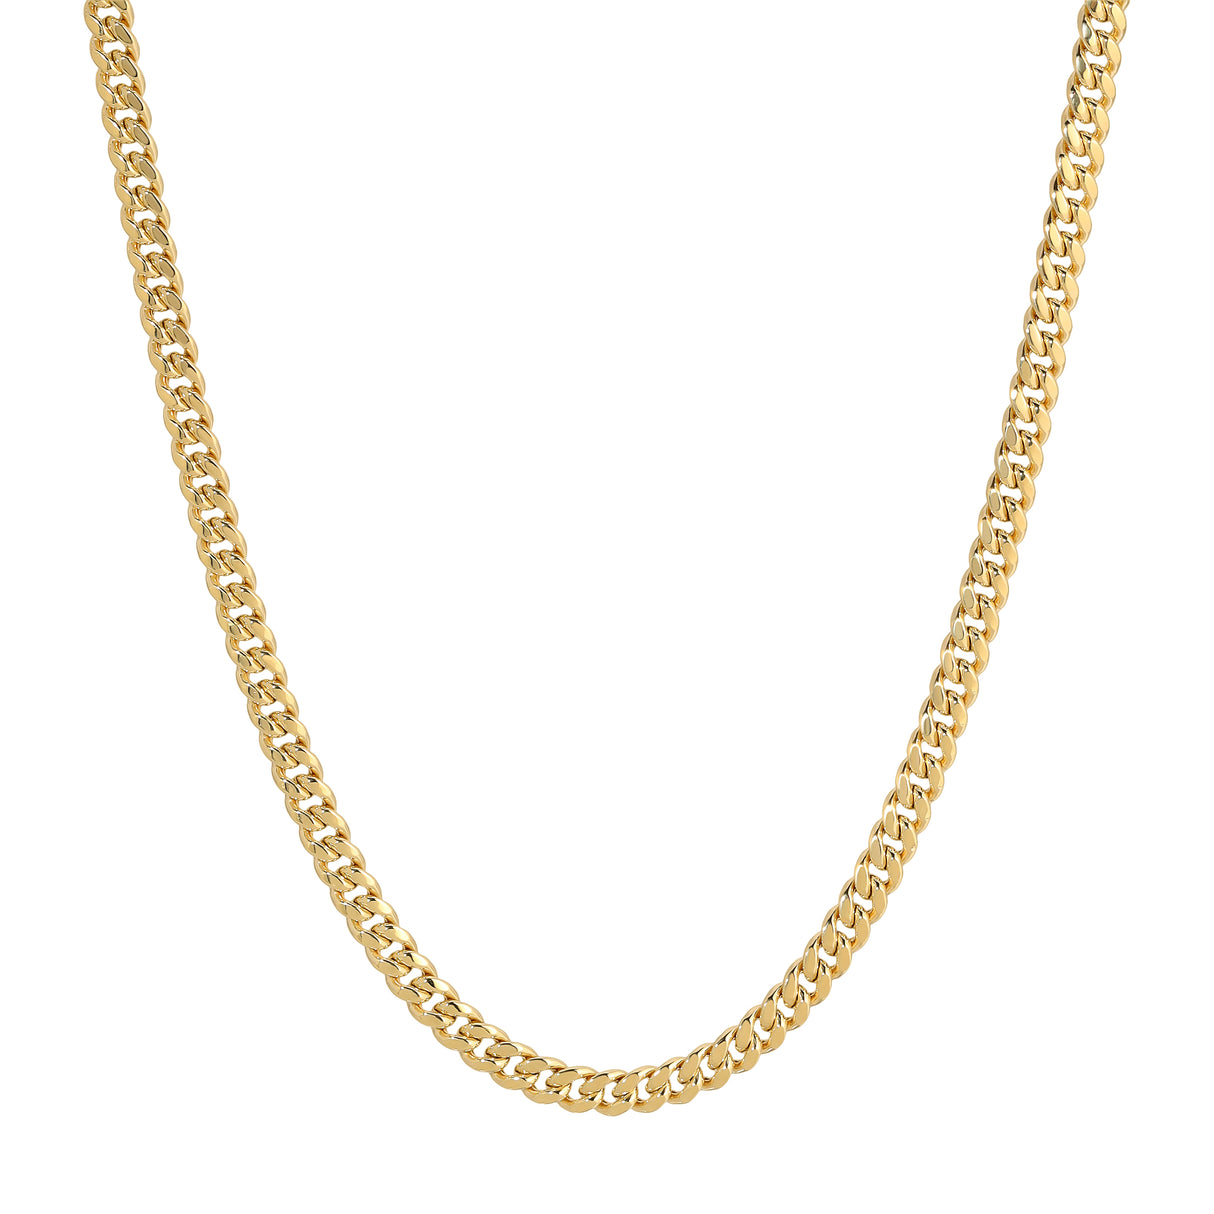 Close-up of a 14K real hollow yellow gold Miami Cuban chain 